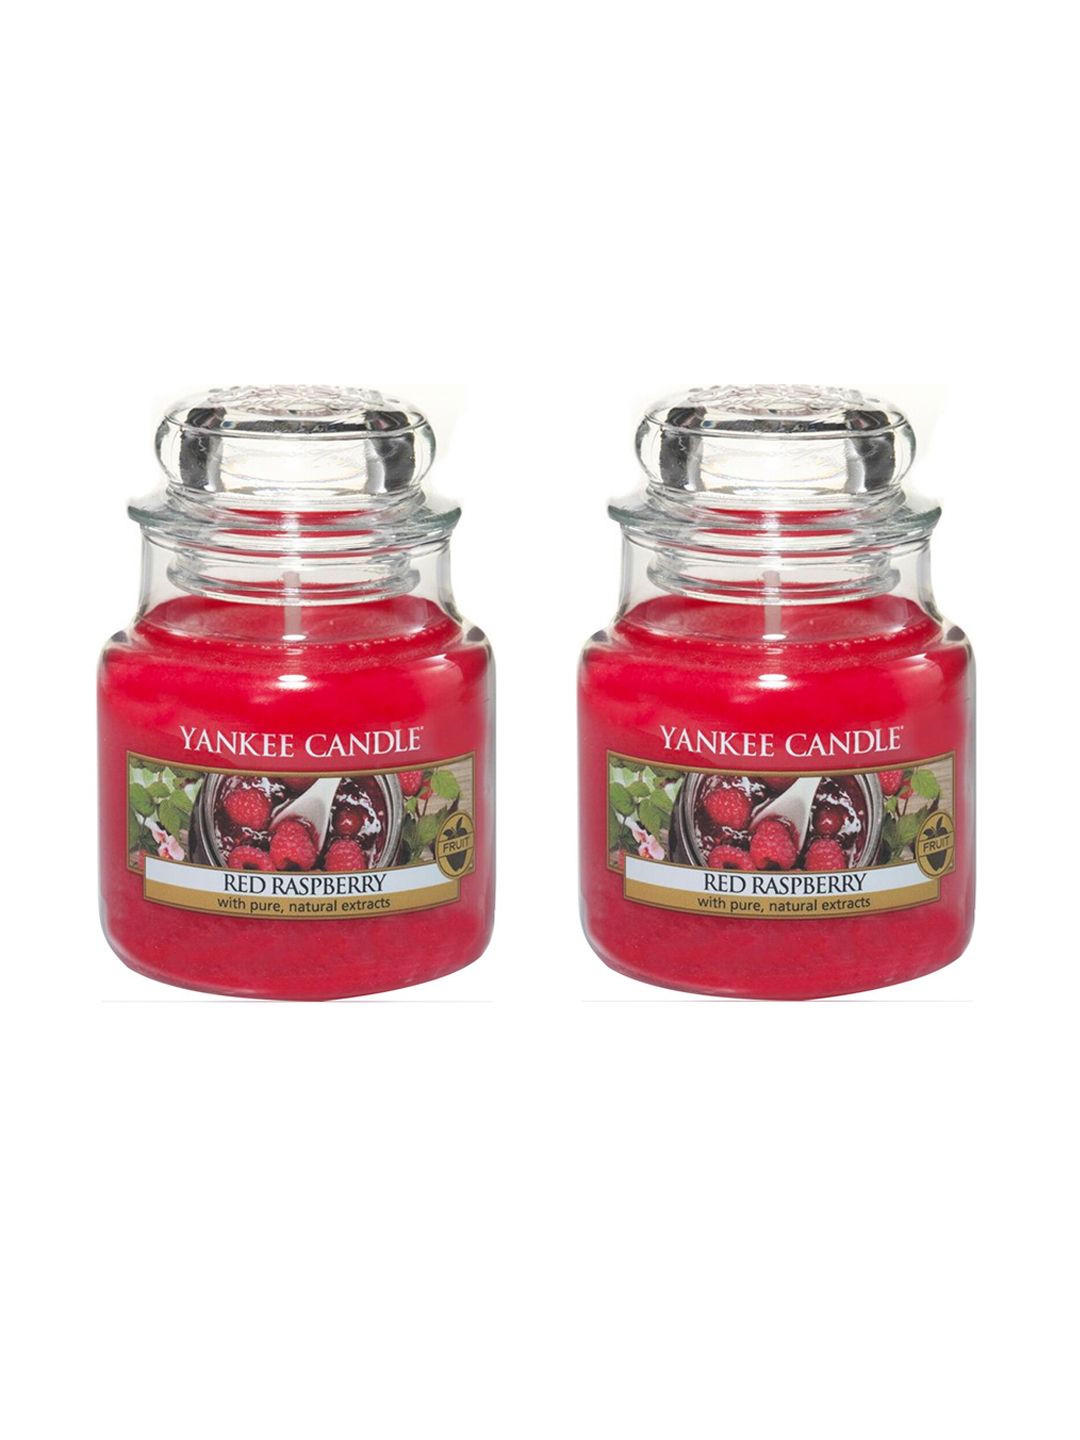 YANKEE CANDLE Set Of 2 Red Raspberry Scented Jar Candles Price in India